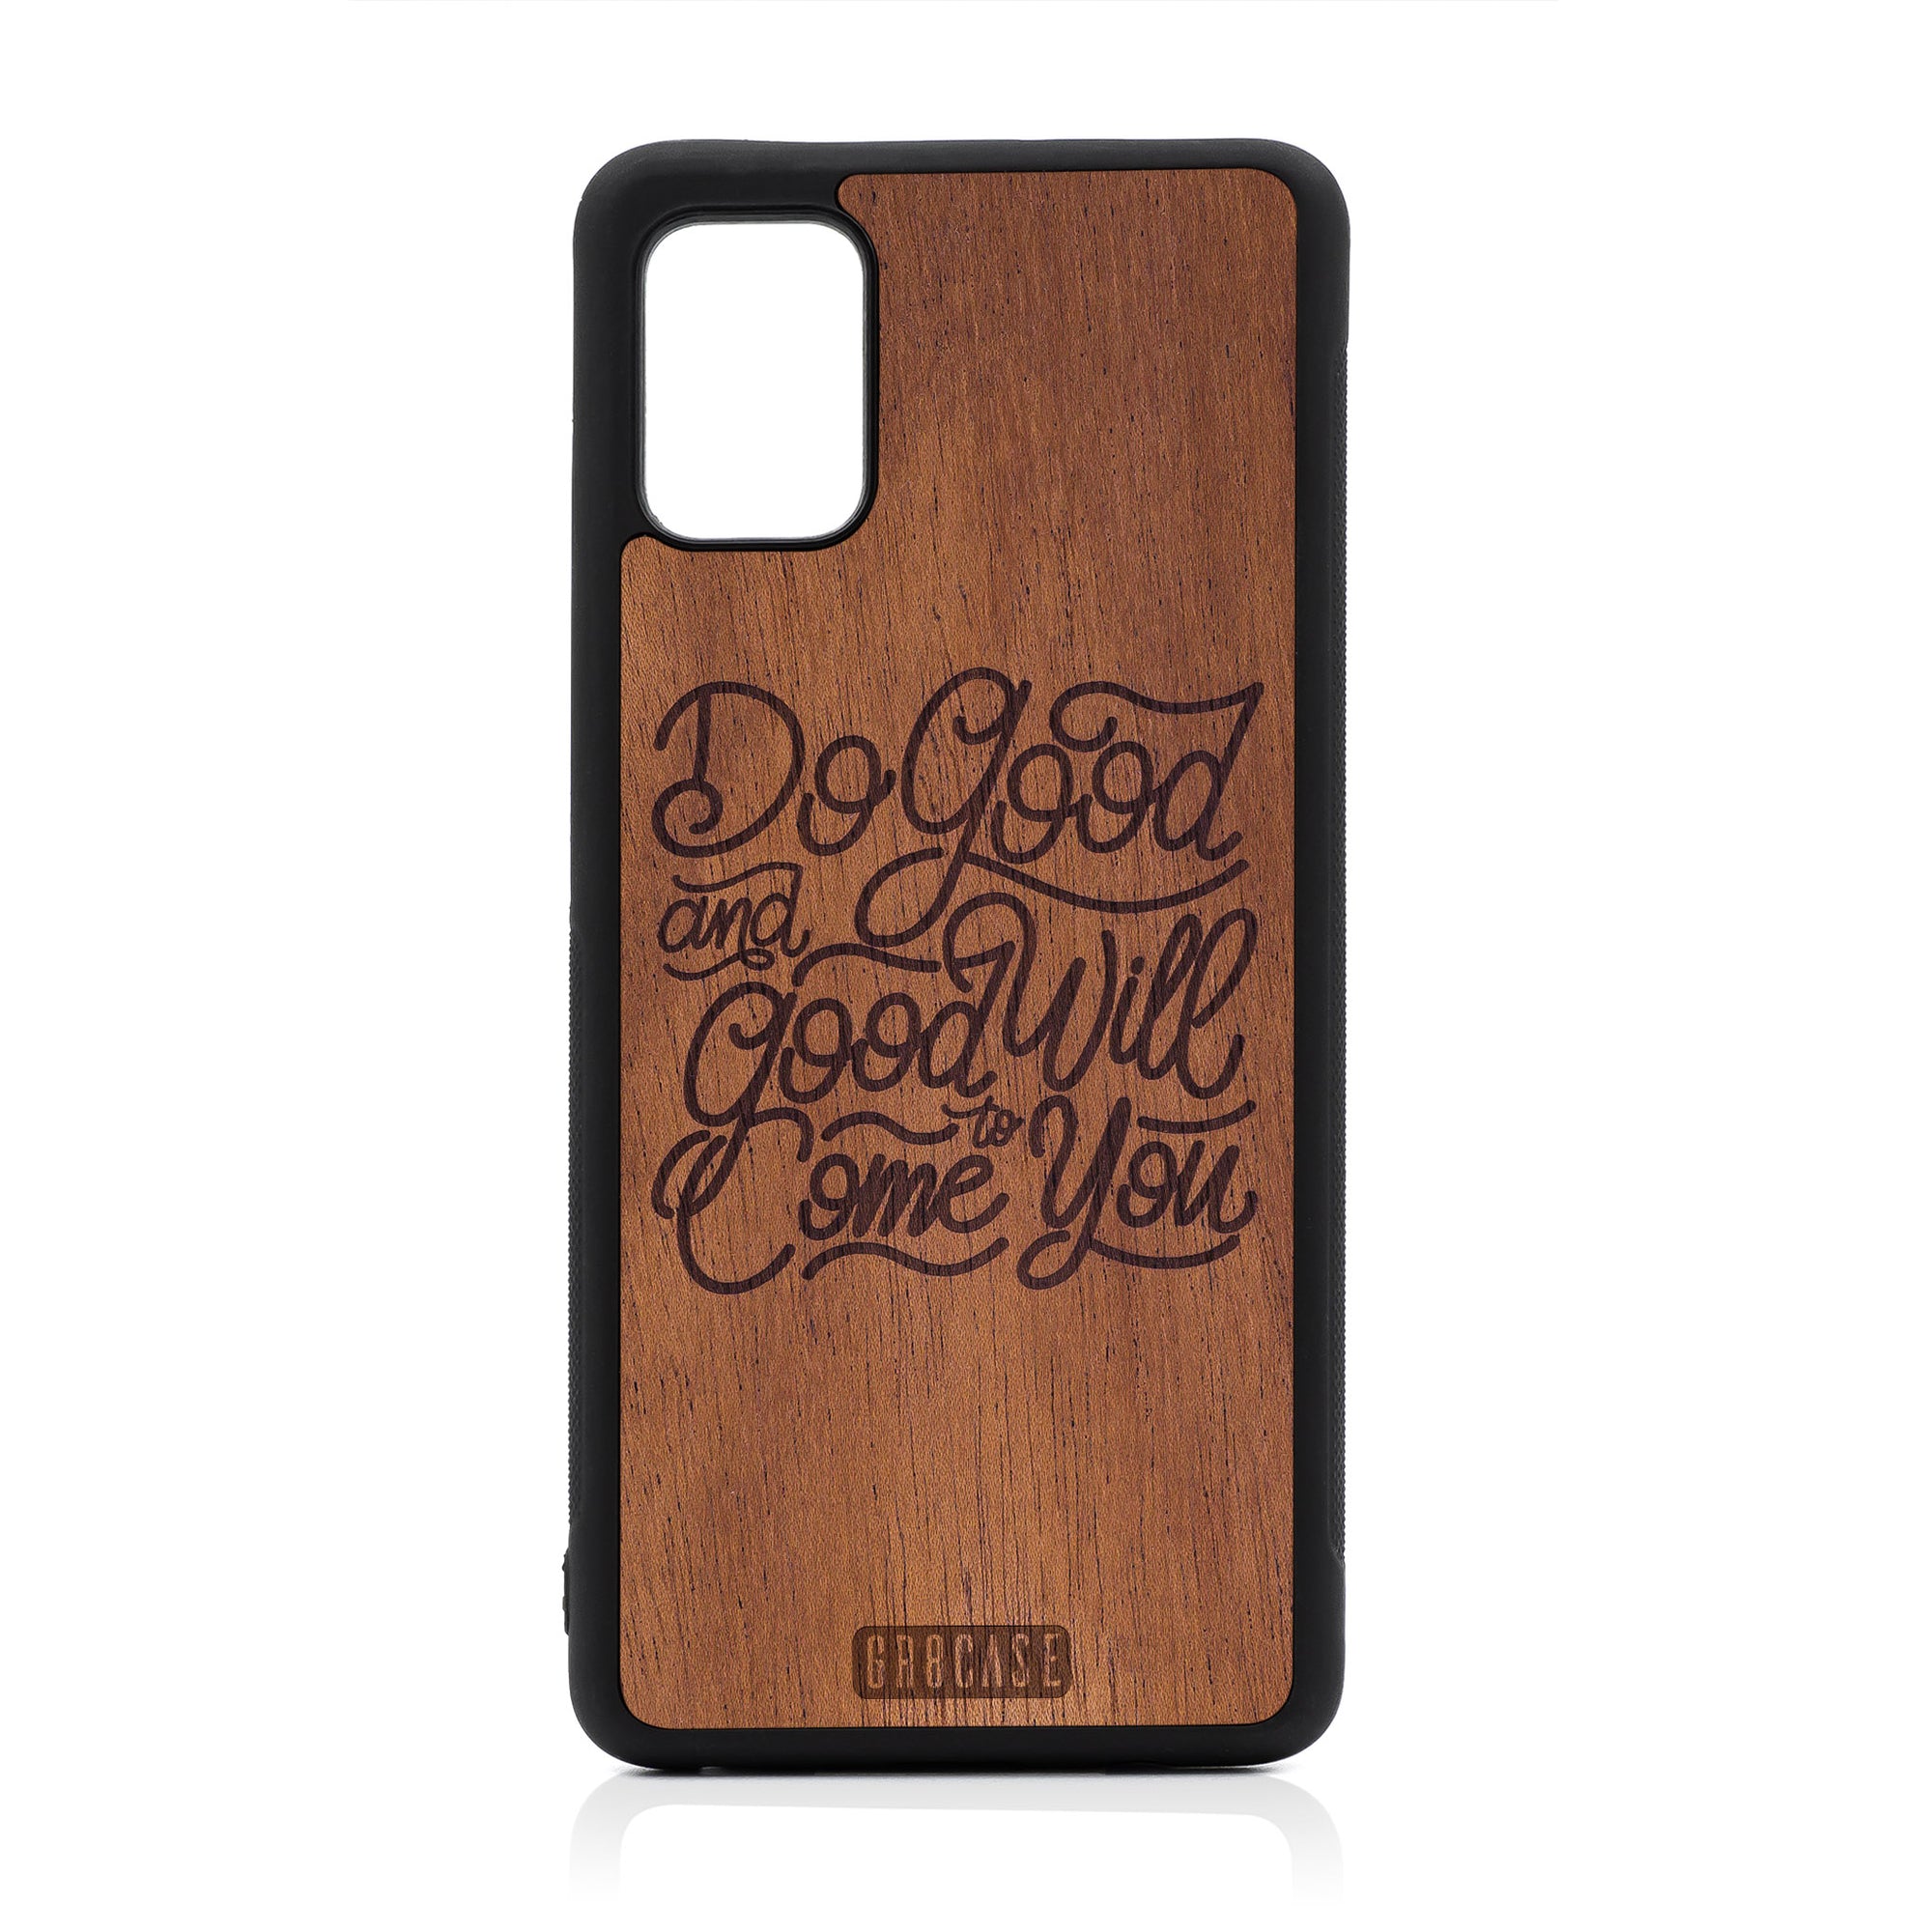 Do Good And Good Will Come To You Design Wood Case For Samsung Galaxy A51-5G